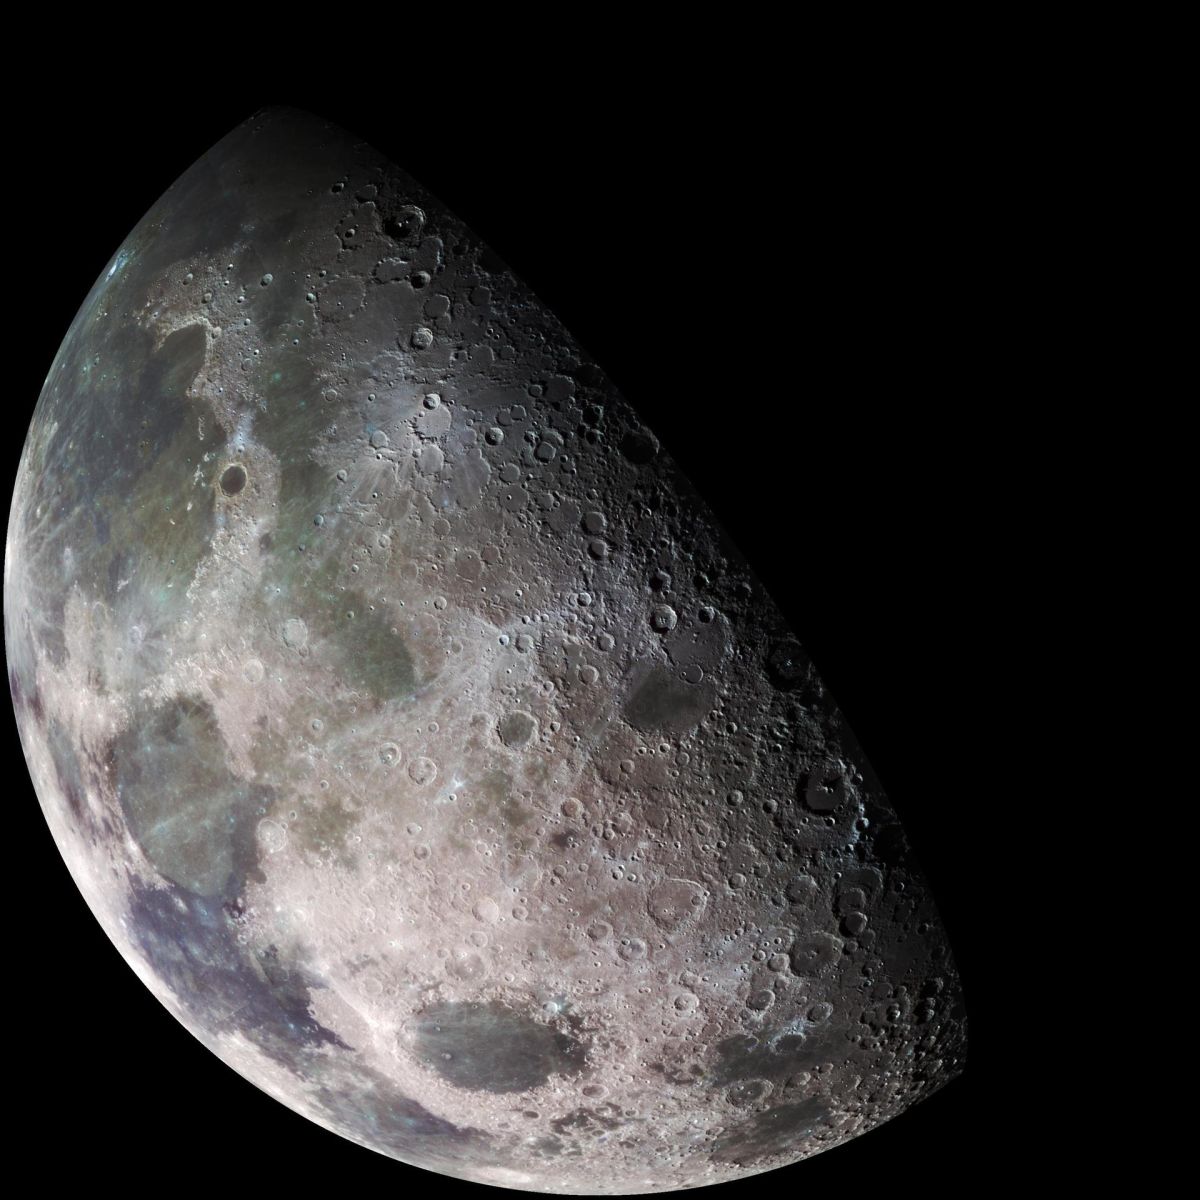 NASA selects 9 scientists to join 2022 Korea Pathfinder Lunar Orbiter mission